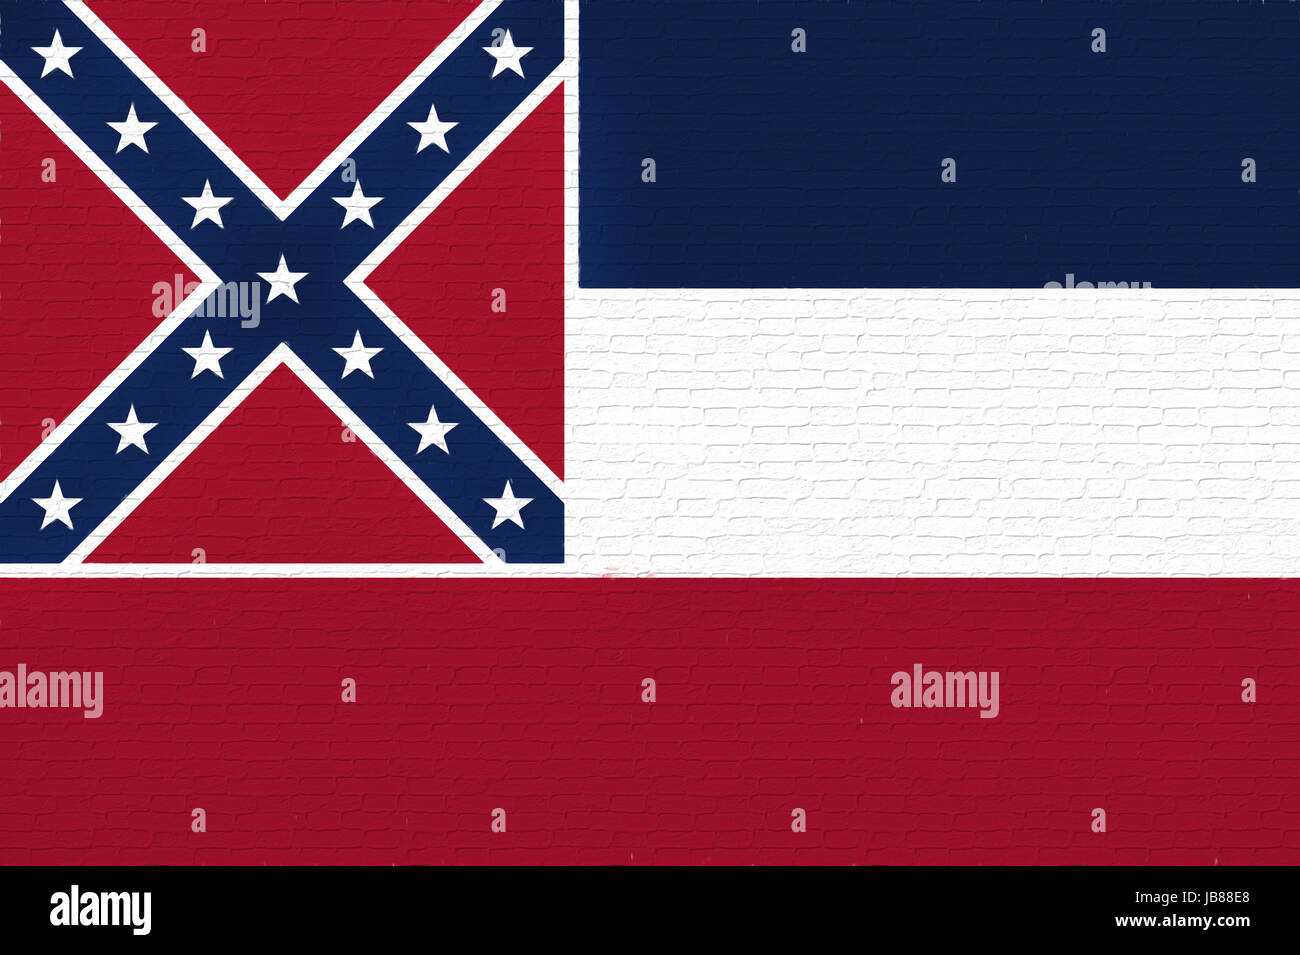 Illustration of the flag of Mississippi state in America looking like it is painted on a wall. Stock Photo